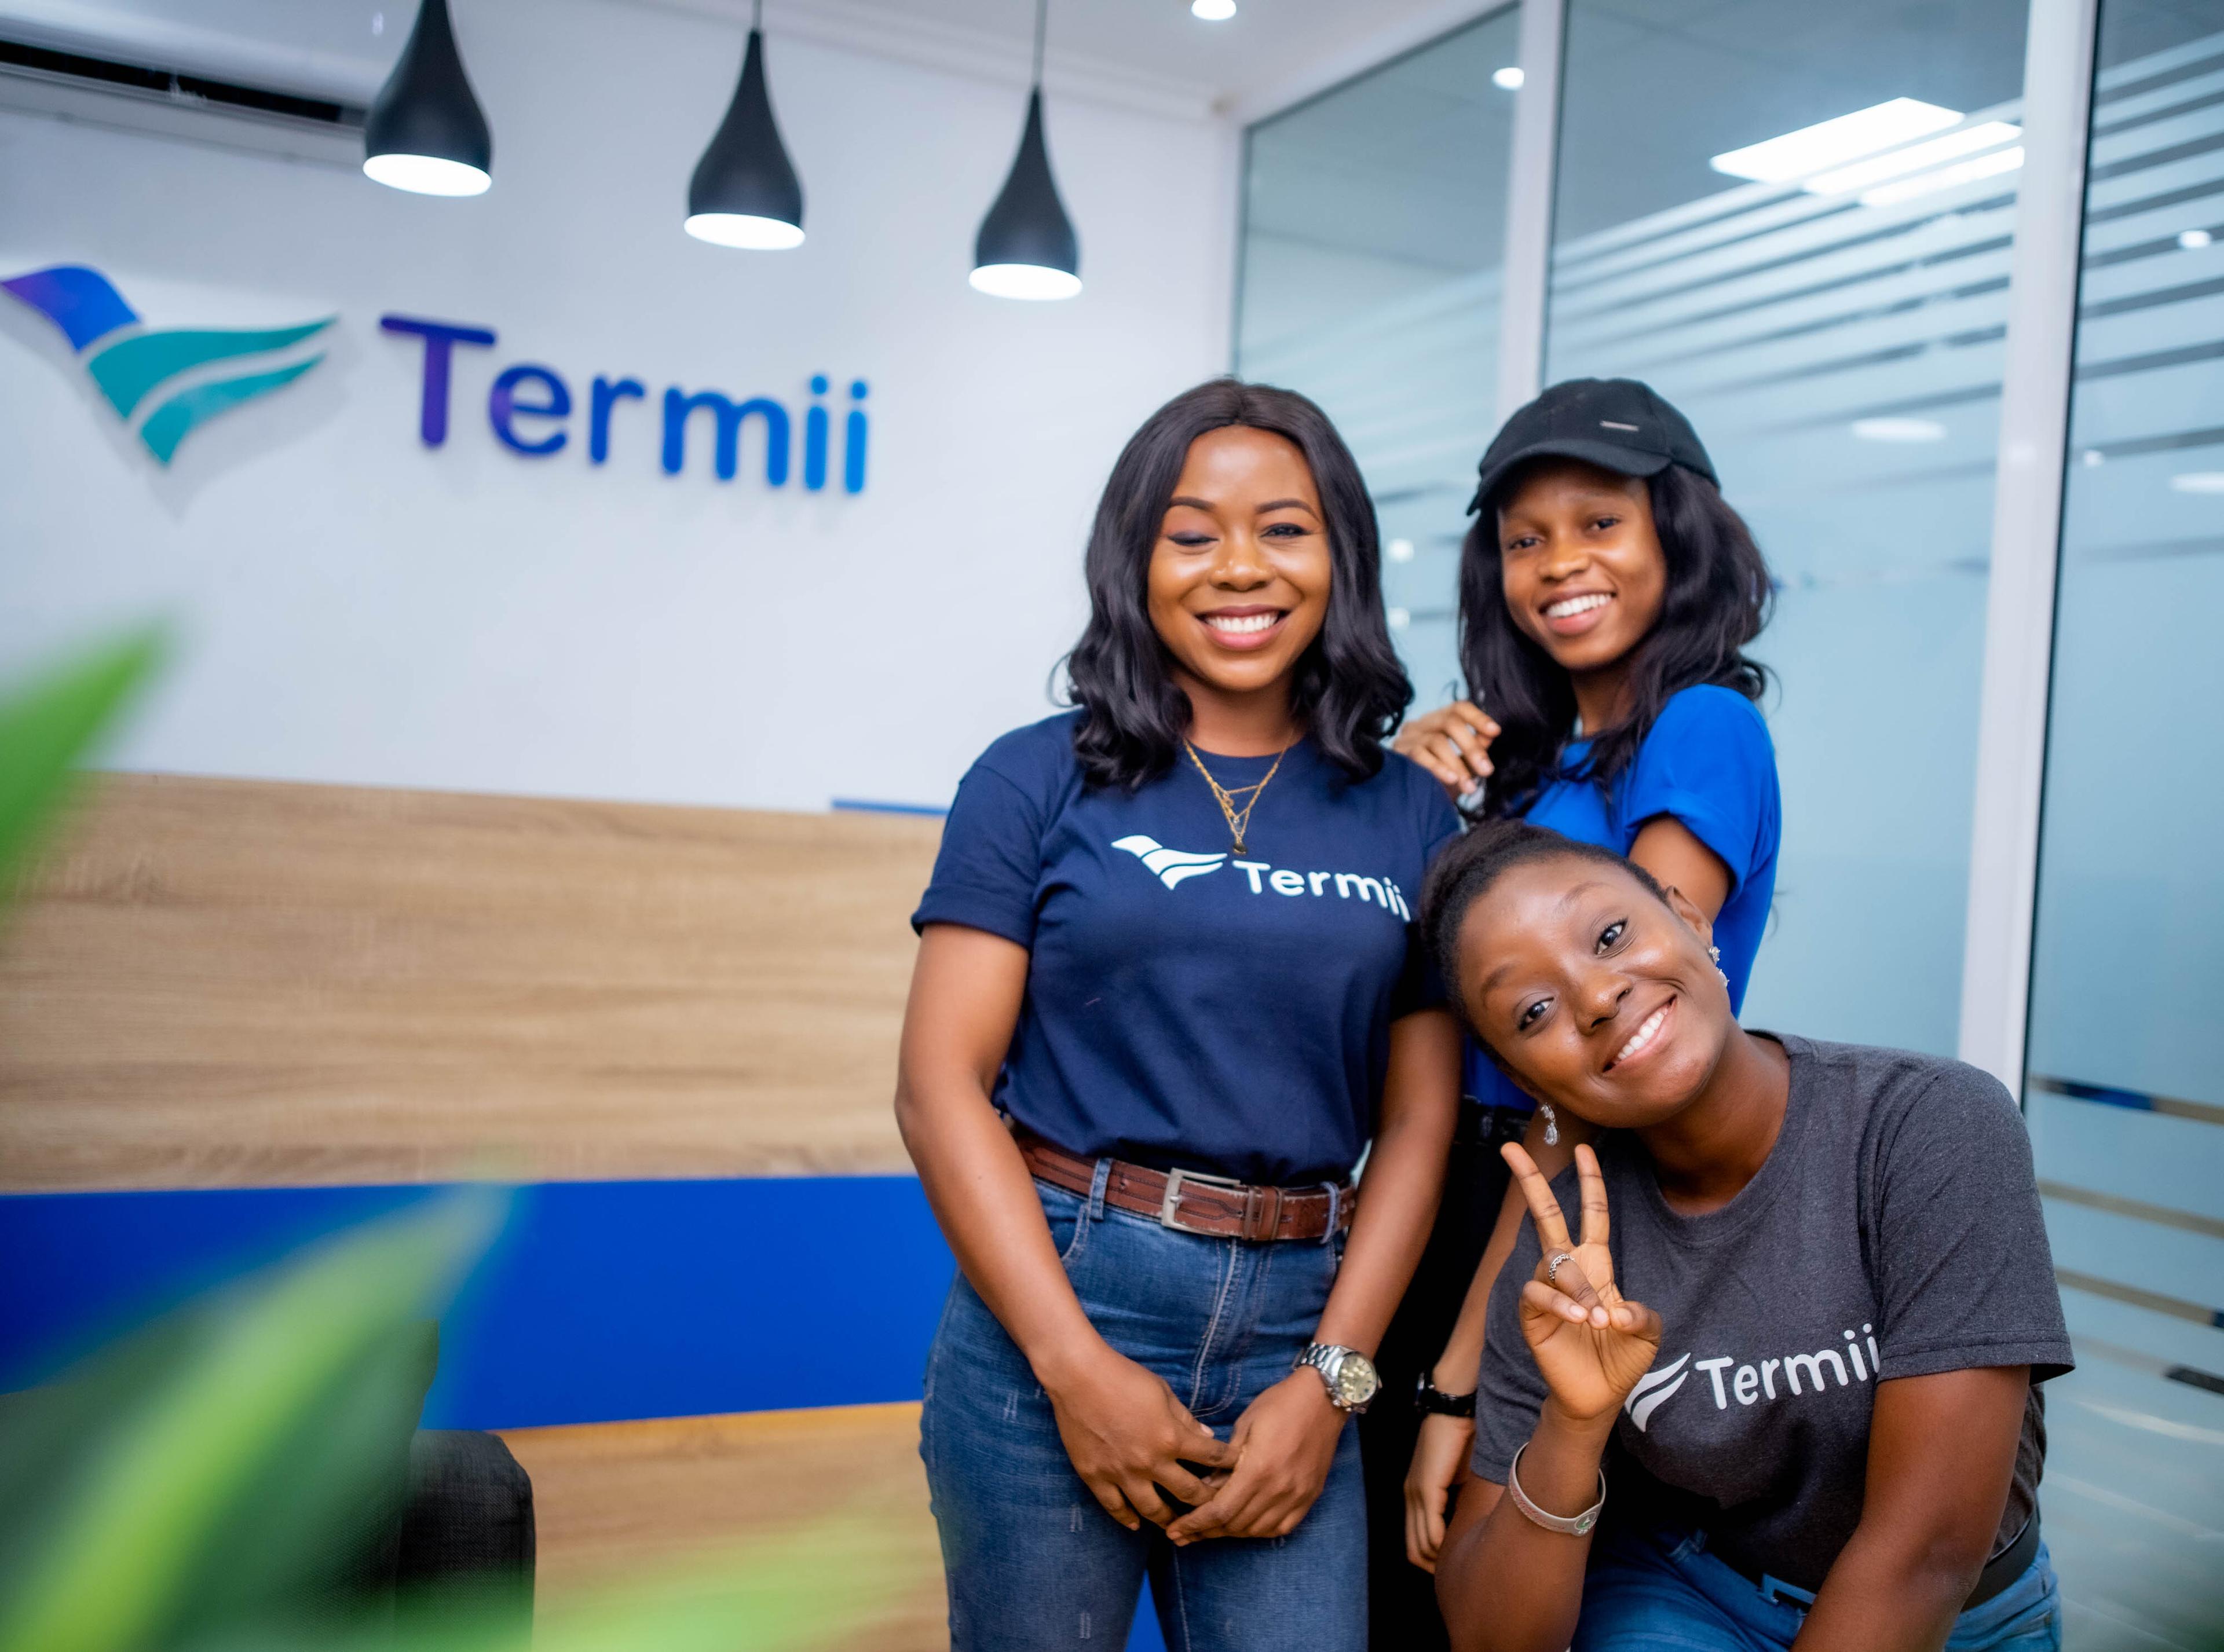 Nigeria’s Termii to launch mobile app and scale customer engagement business with new funding